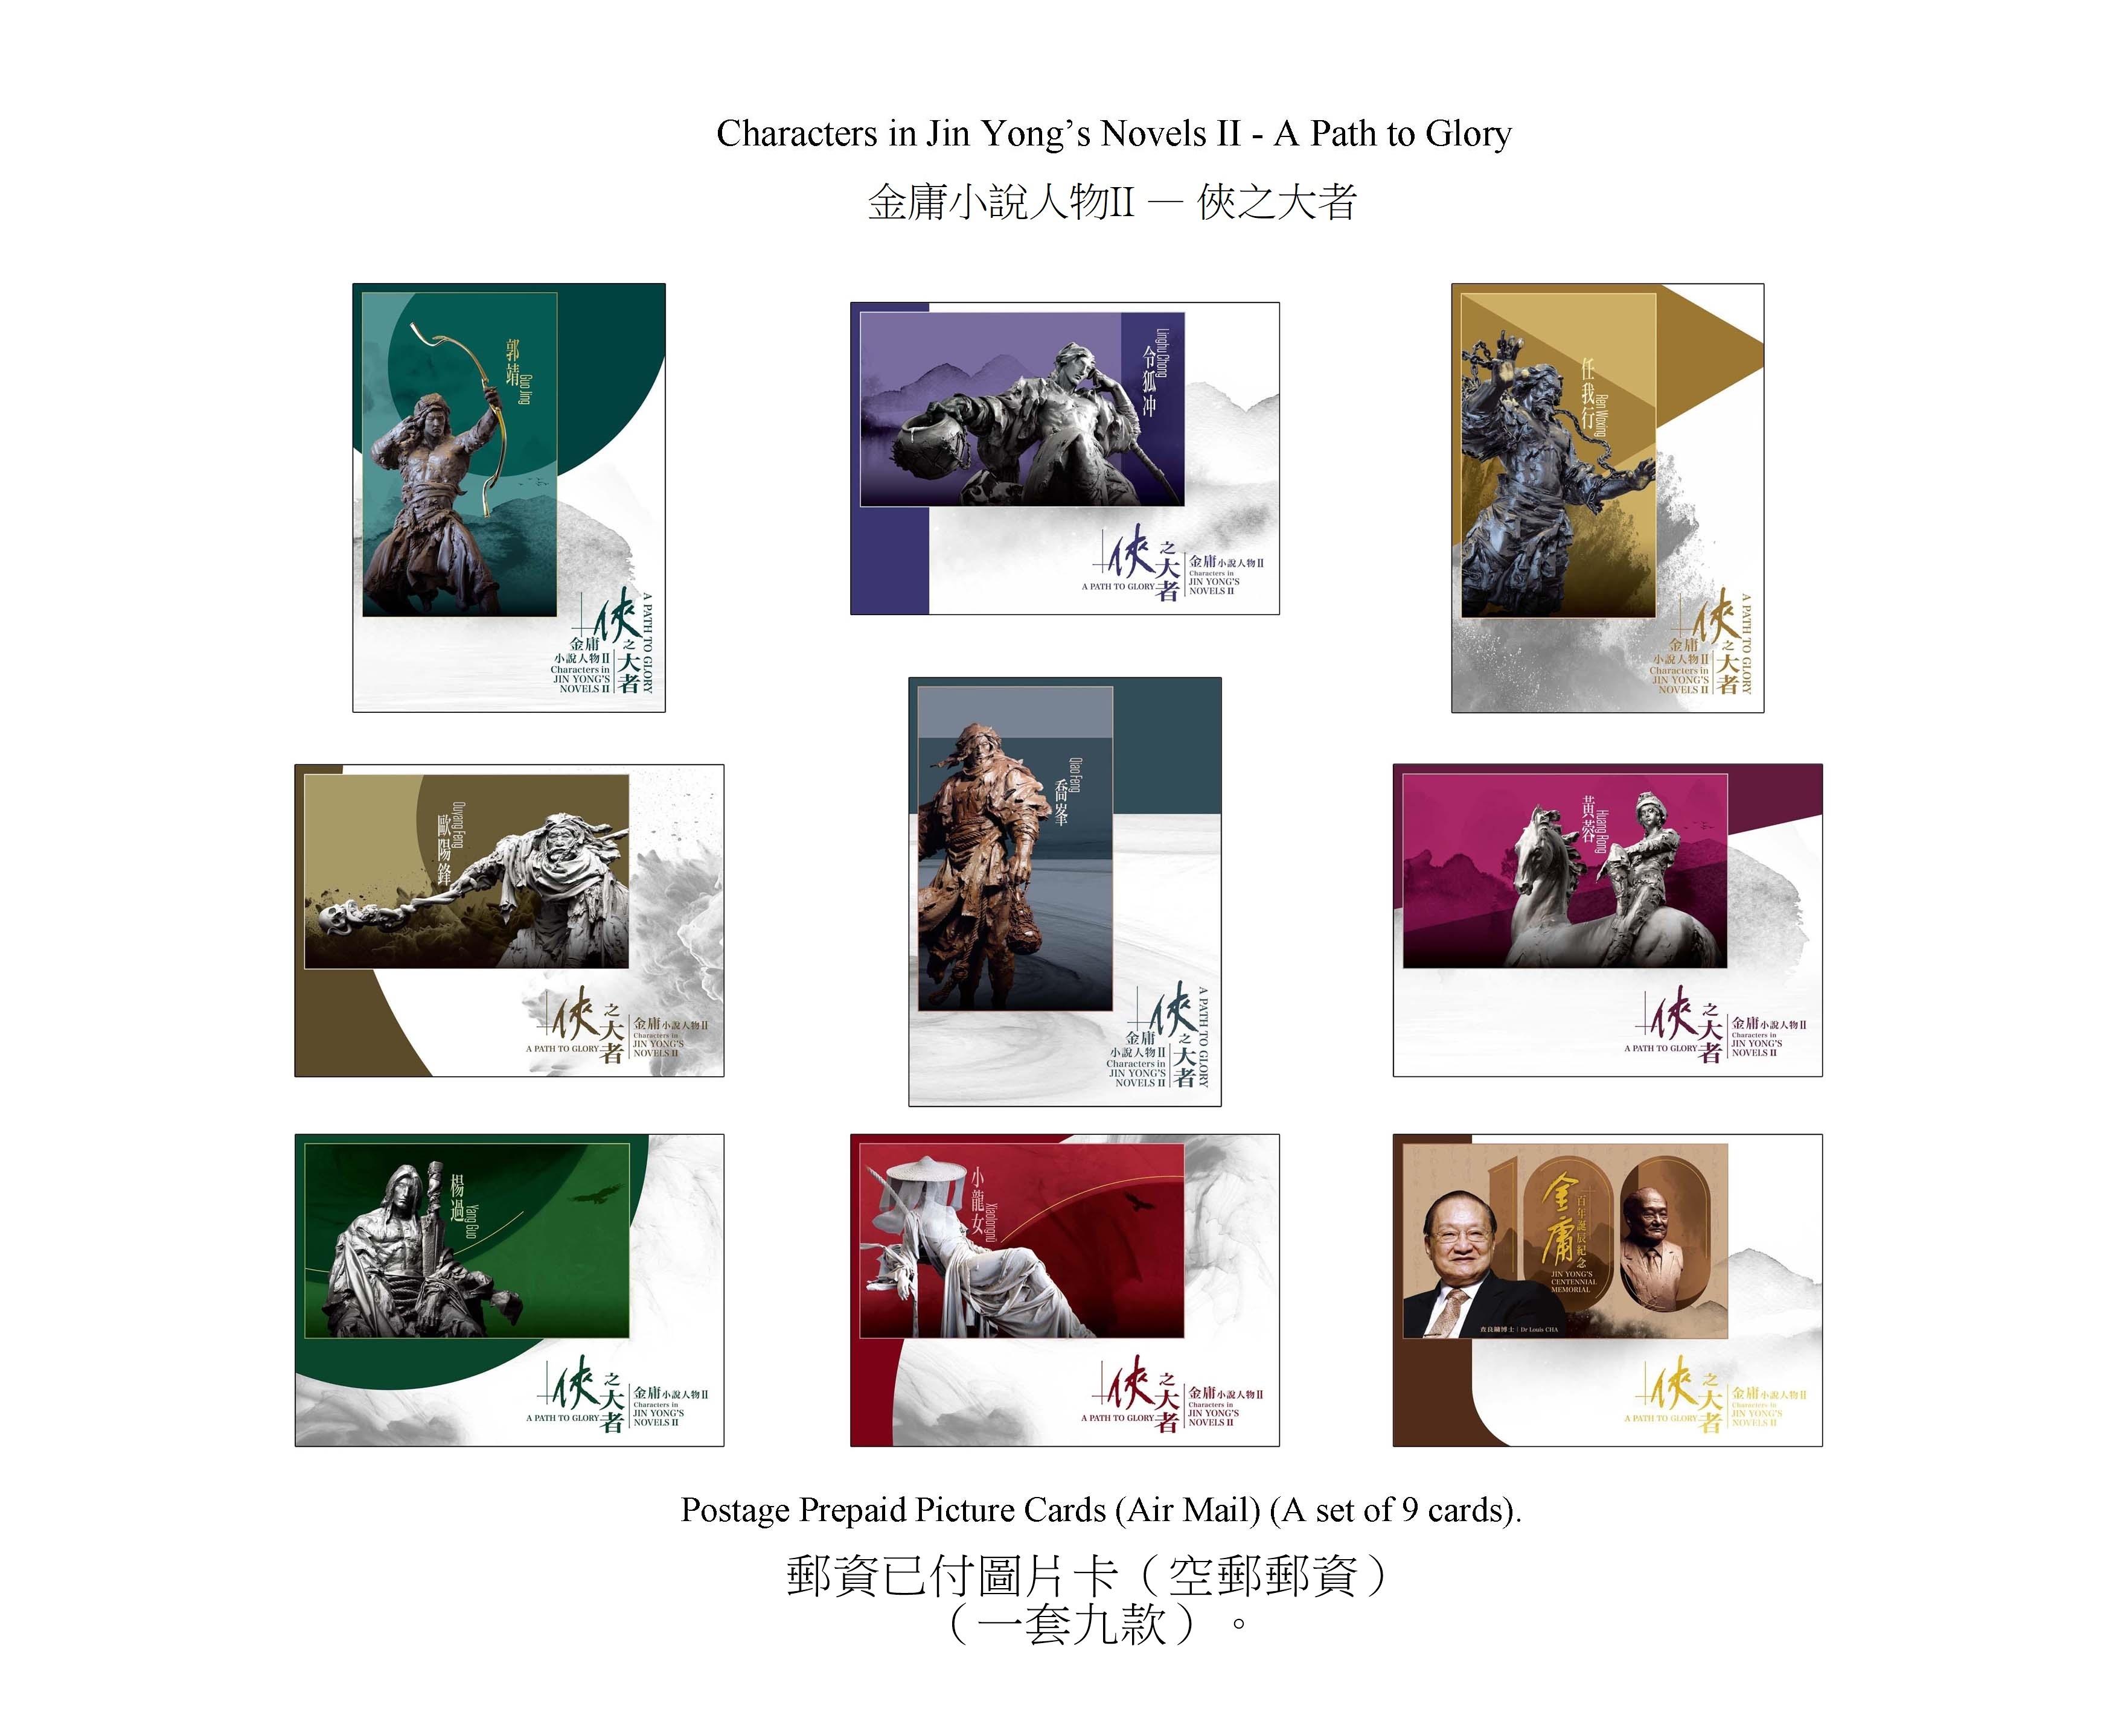 Hongkong Post will launch a special stamp issue and associated philatelic products on the theme of "Characters in Jin Yong's Novels II - A Path to Glory" on March 14 (Thursday). Photo shows the postage prepaid picture cards (air mail).

